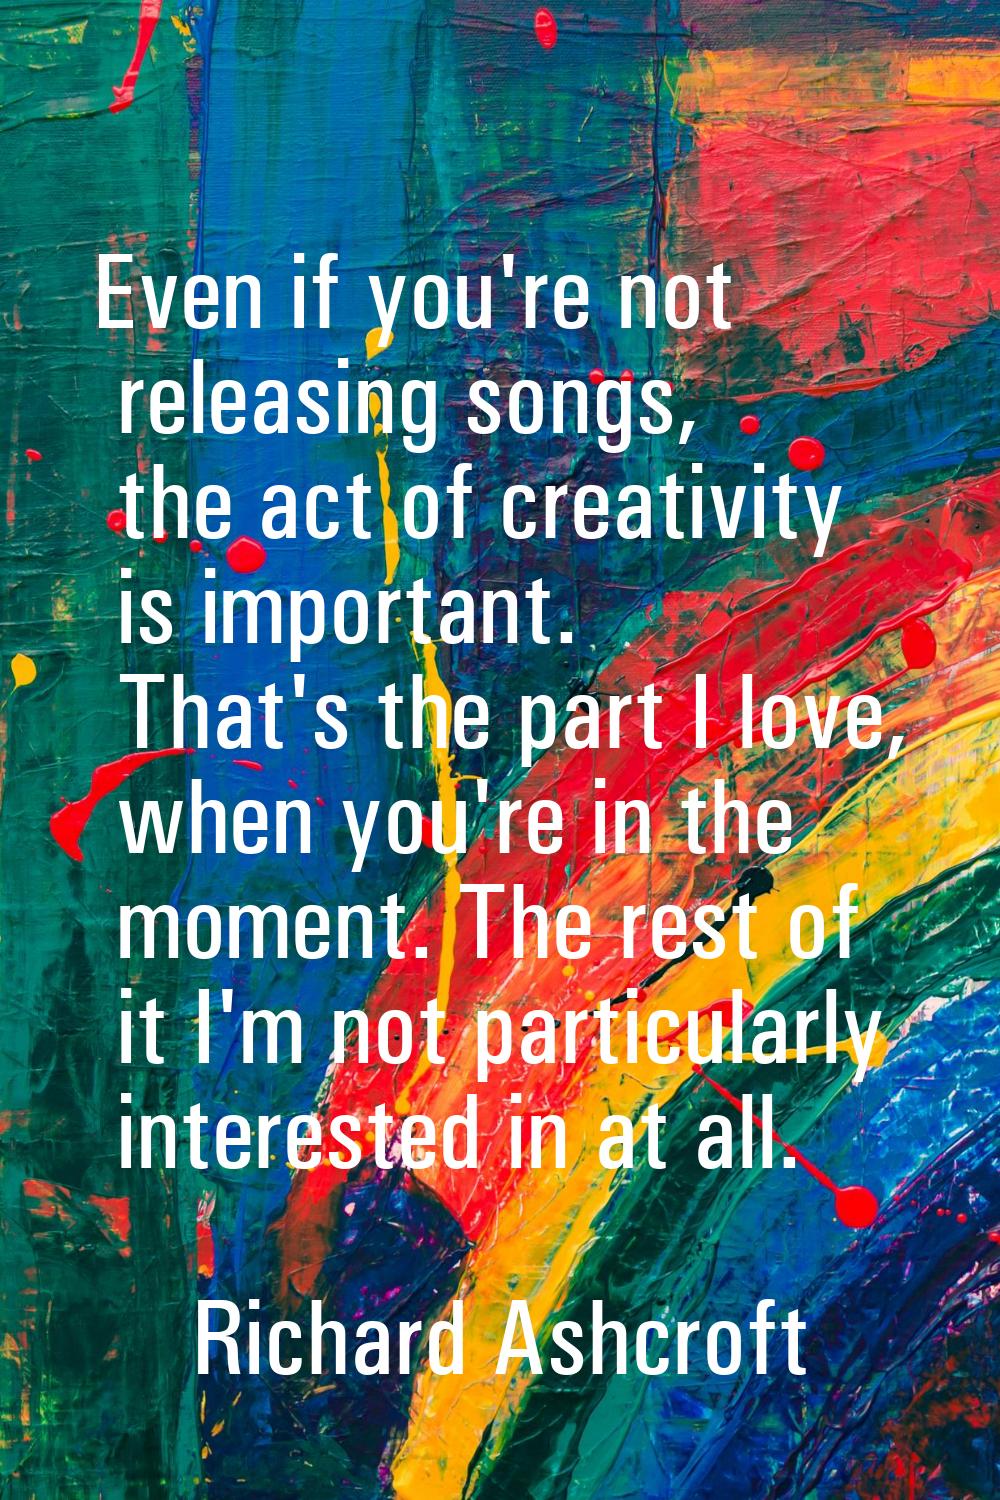 Even if you're not releasing songs, the act of creativity is important. That's the part I love, whe